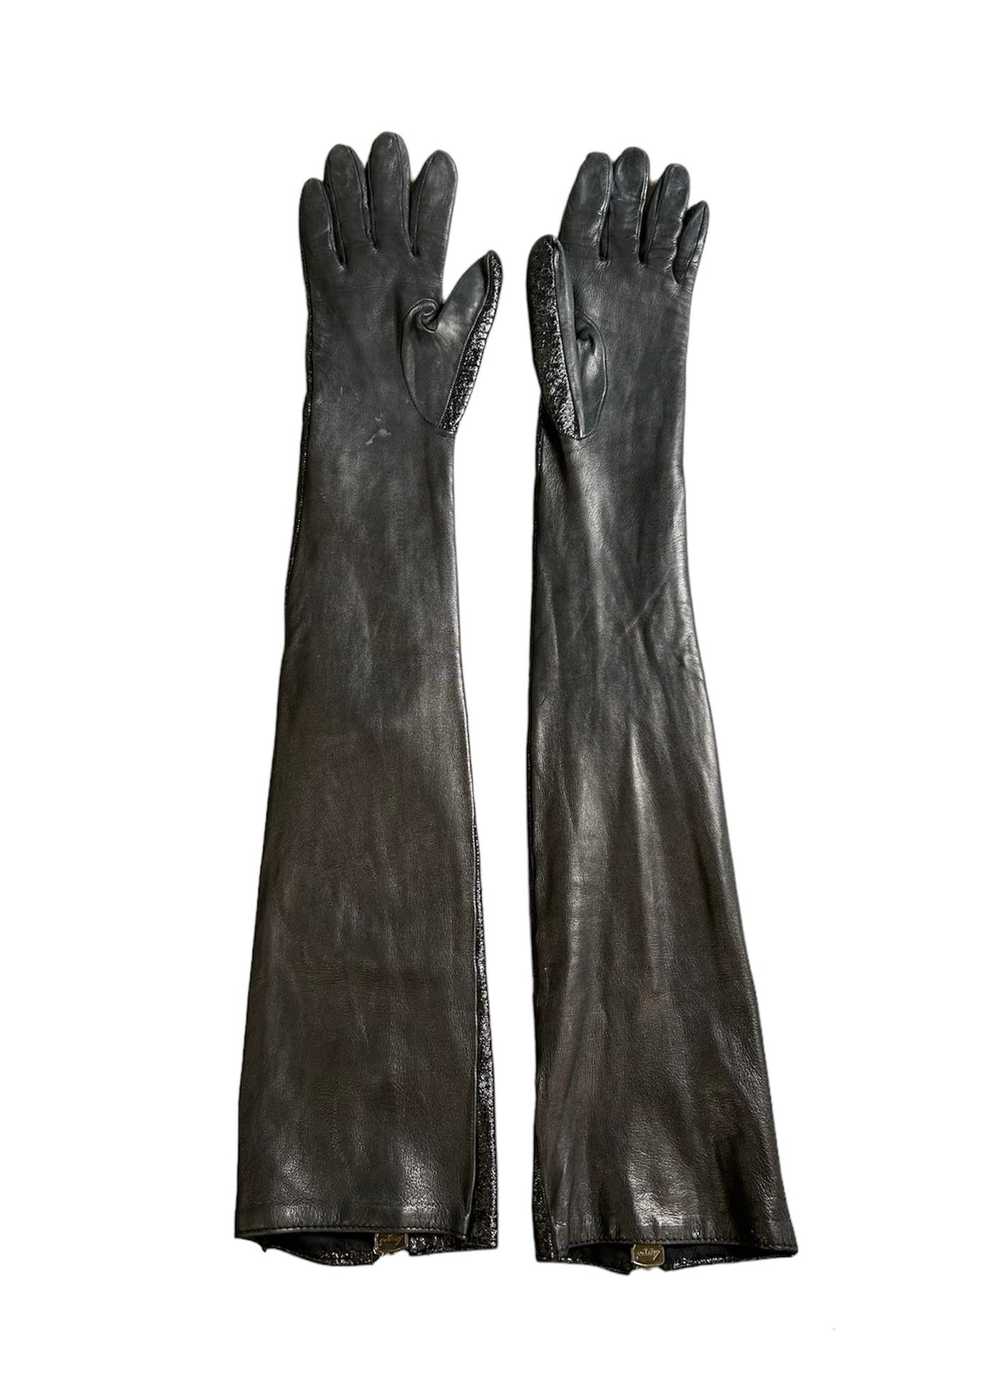 Burberry Black Leather Opera Gloves with Statemen… - image 4